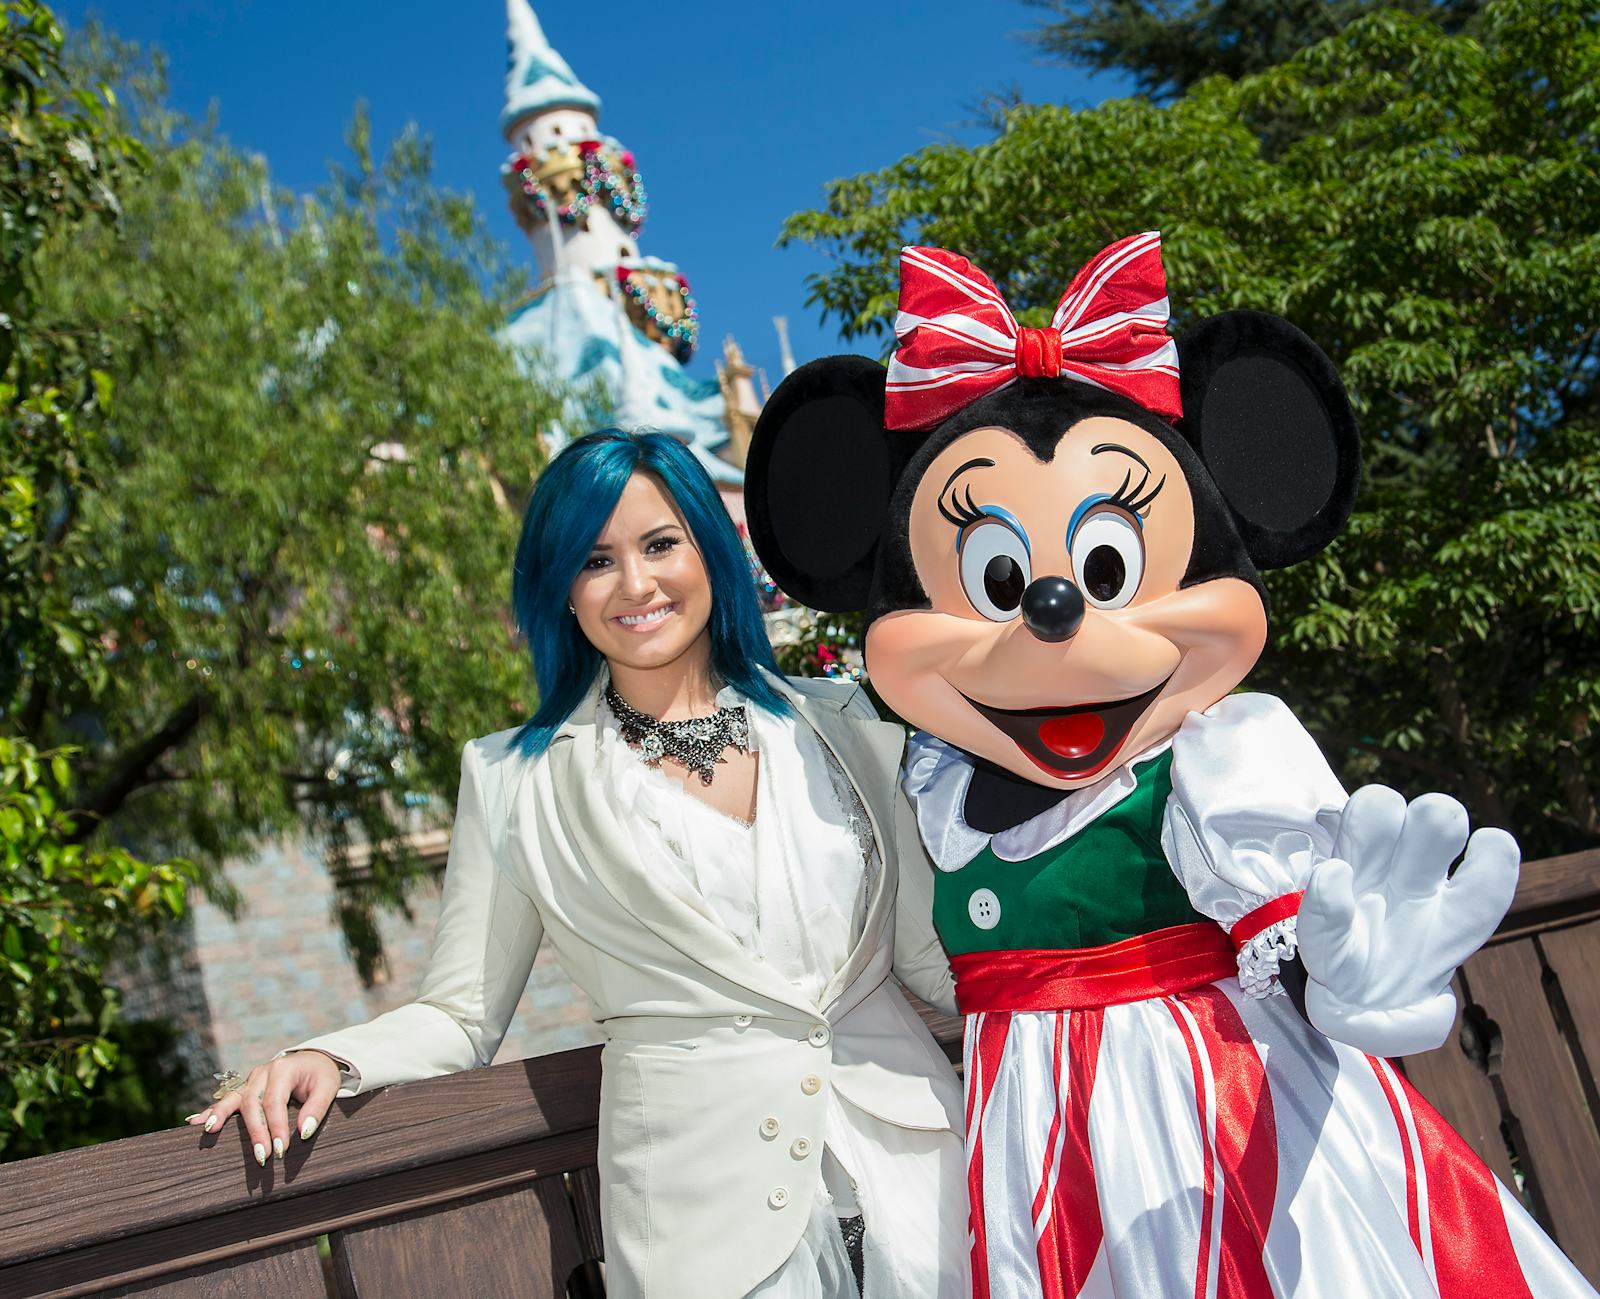 23 Celebrities Who Love Disneyland As Much As You Do